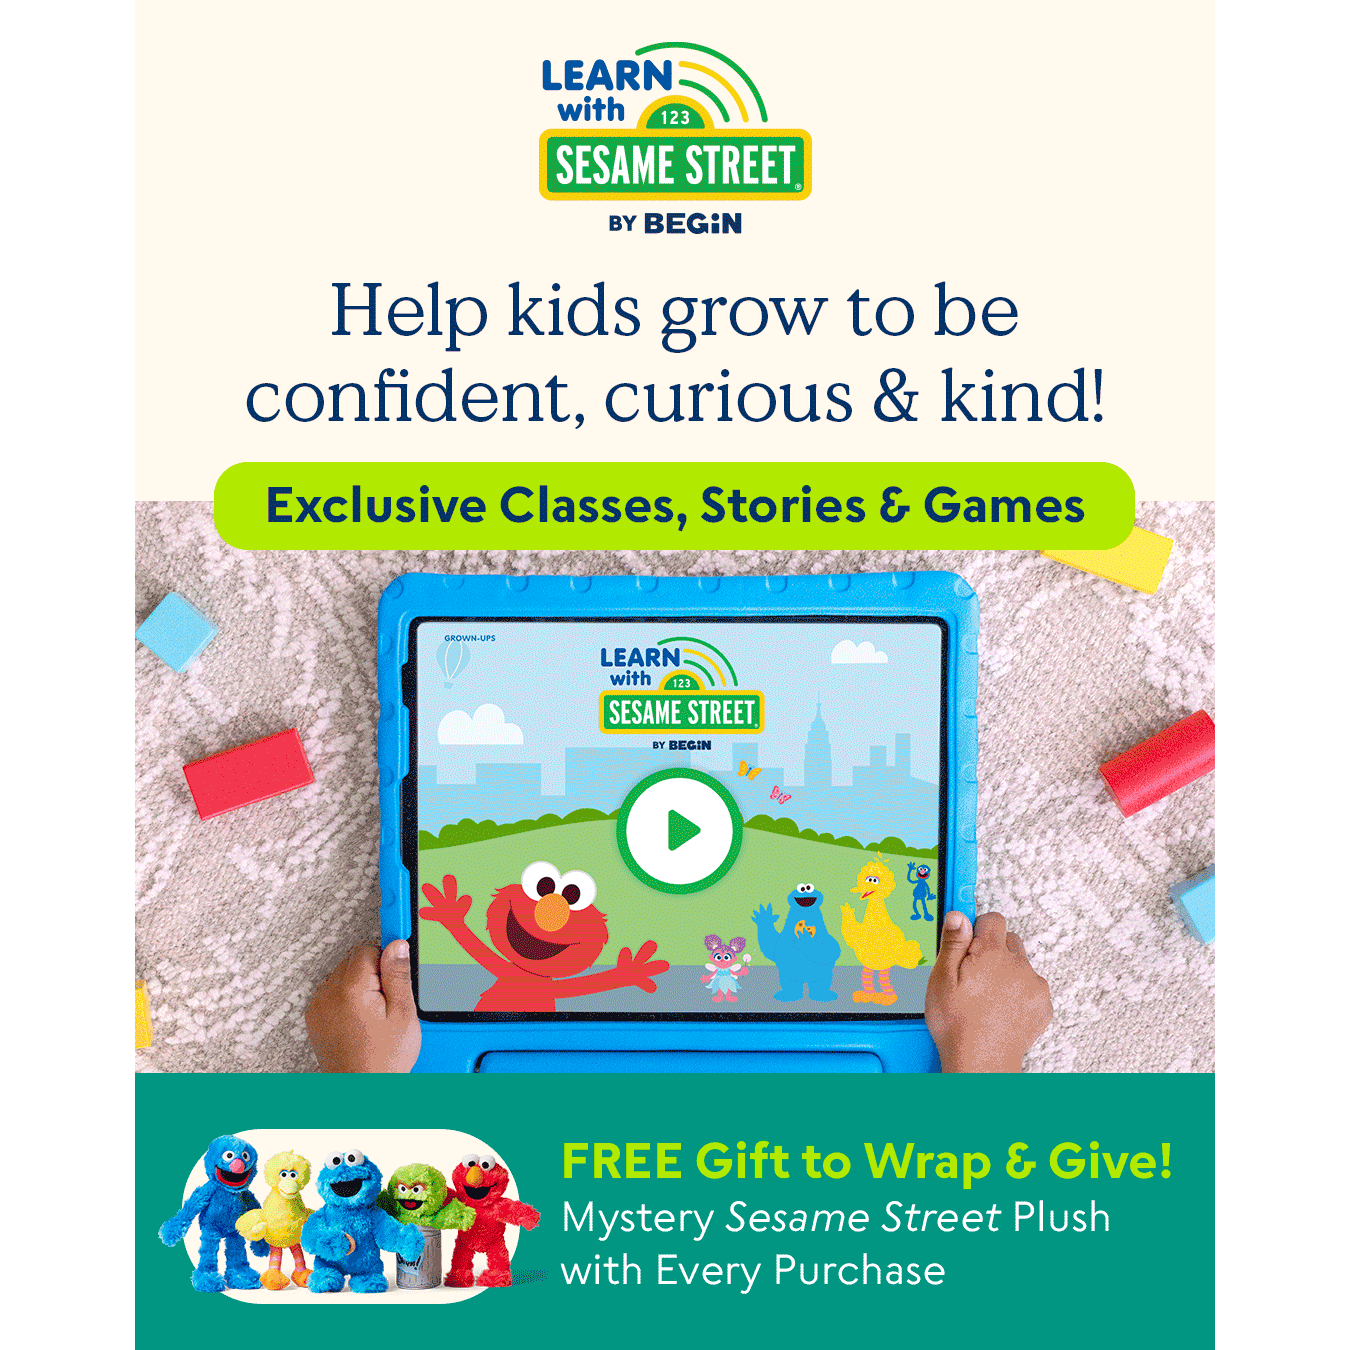 Learn with Sesame Street - Help kids grow to be confident, curious & kind!
Exclusive Classes, Stories & Games
Identifying Emotions
Managing Big Feelings
Building Social Skills
FREE Gift to Wrap & Give!
Mystery Sesame Street Plush with Every Purchase